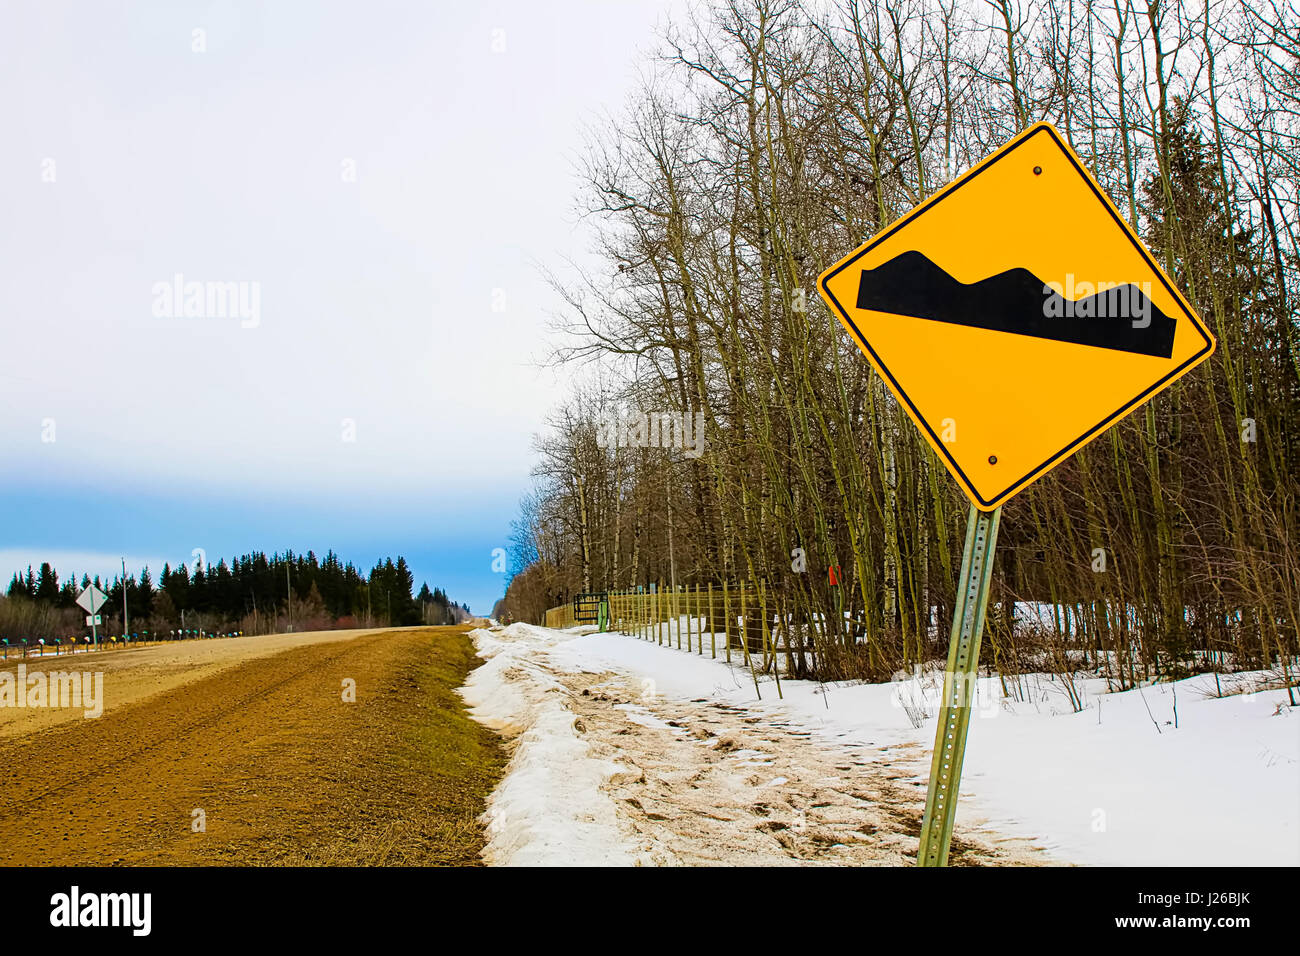 Warning rough road ahead sign. Stock Photo